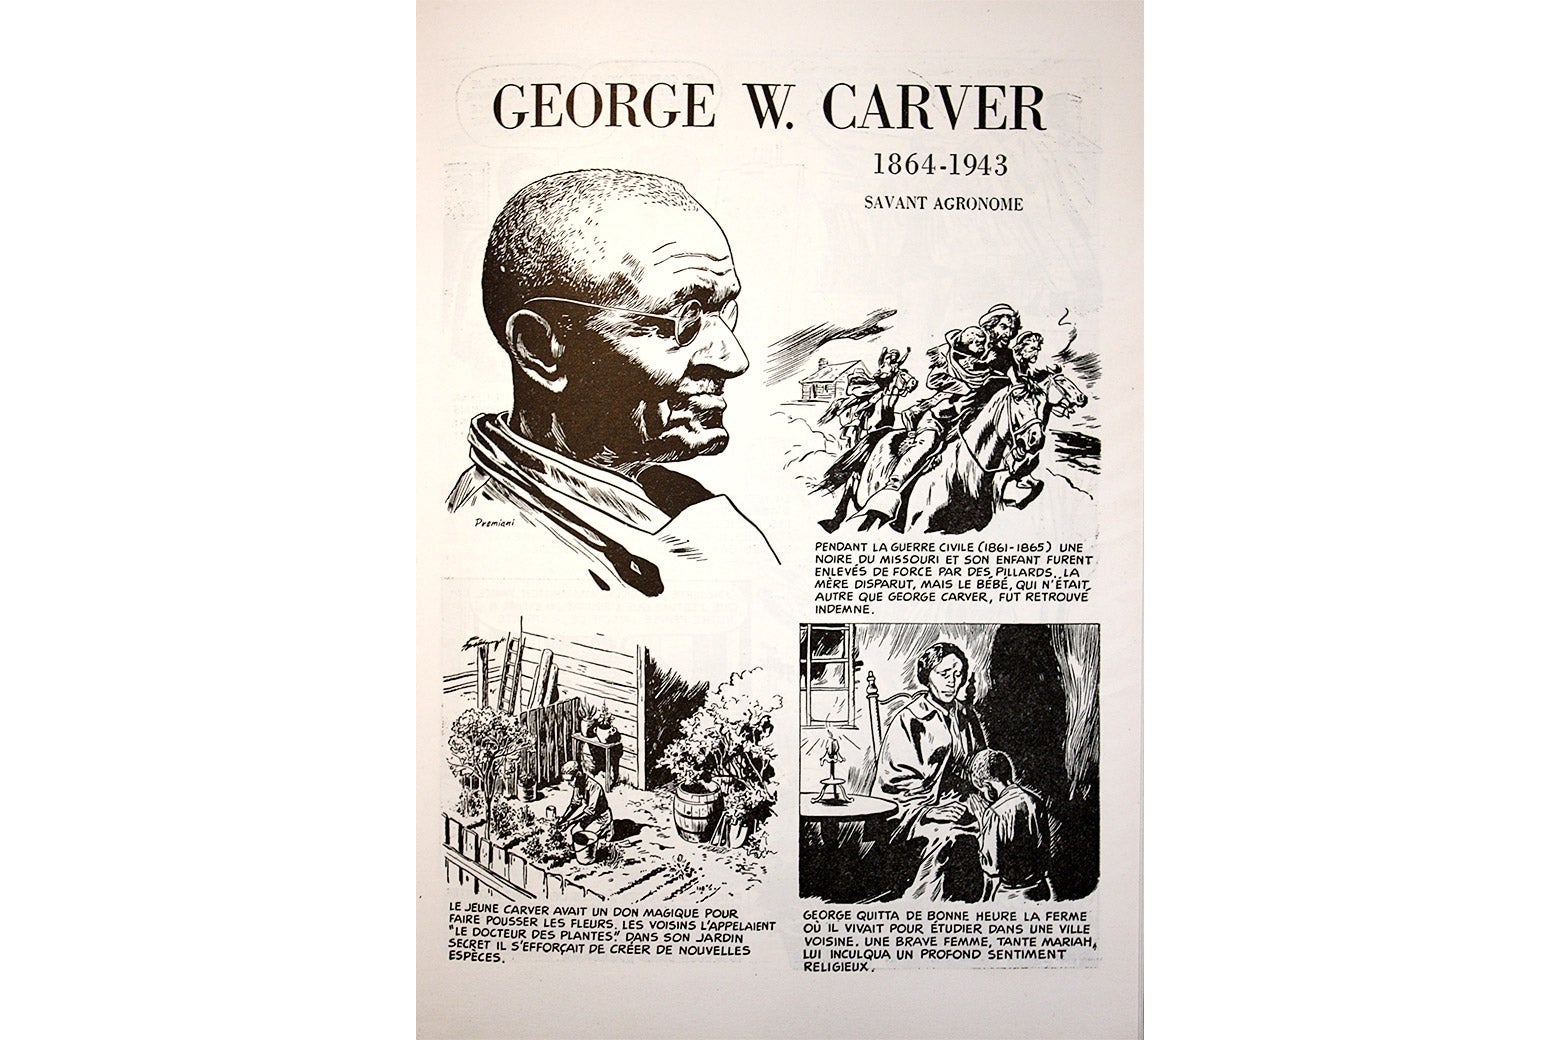 A page about George W. Carver.